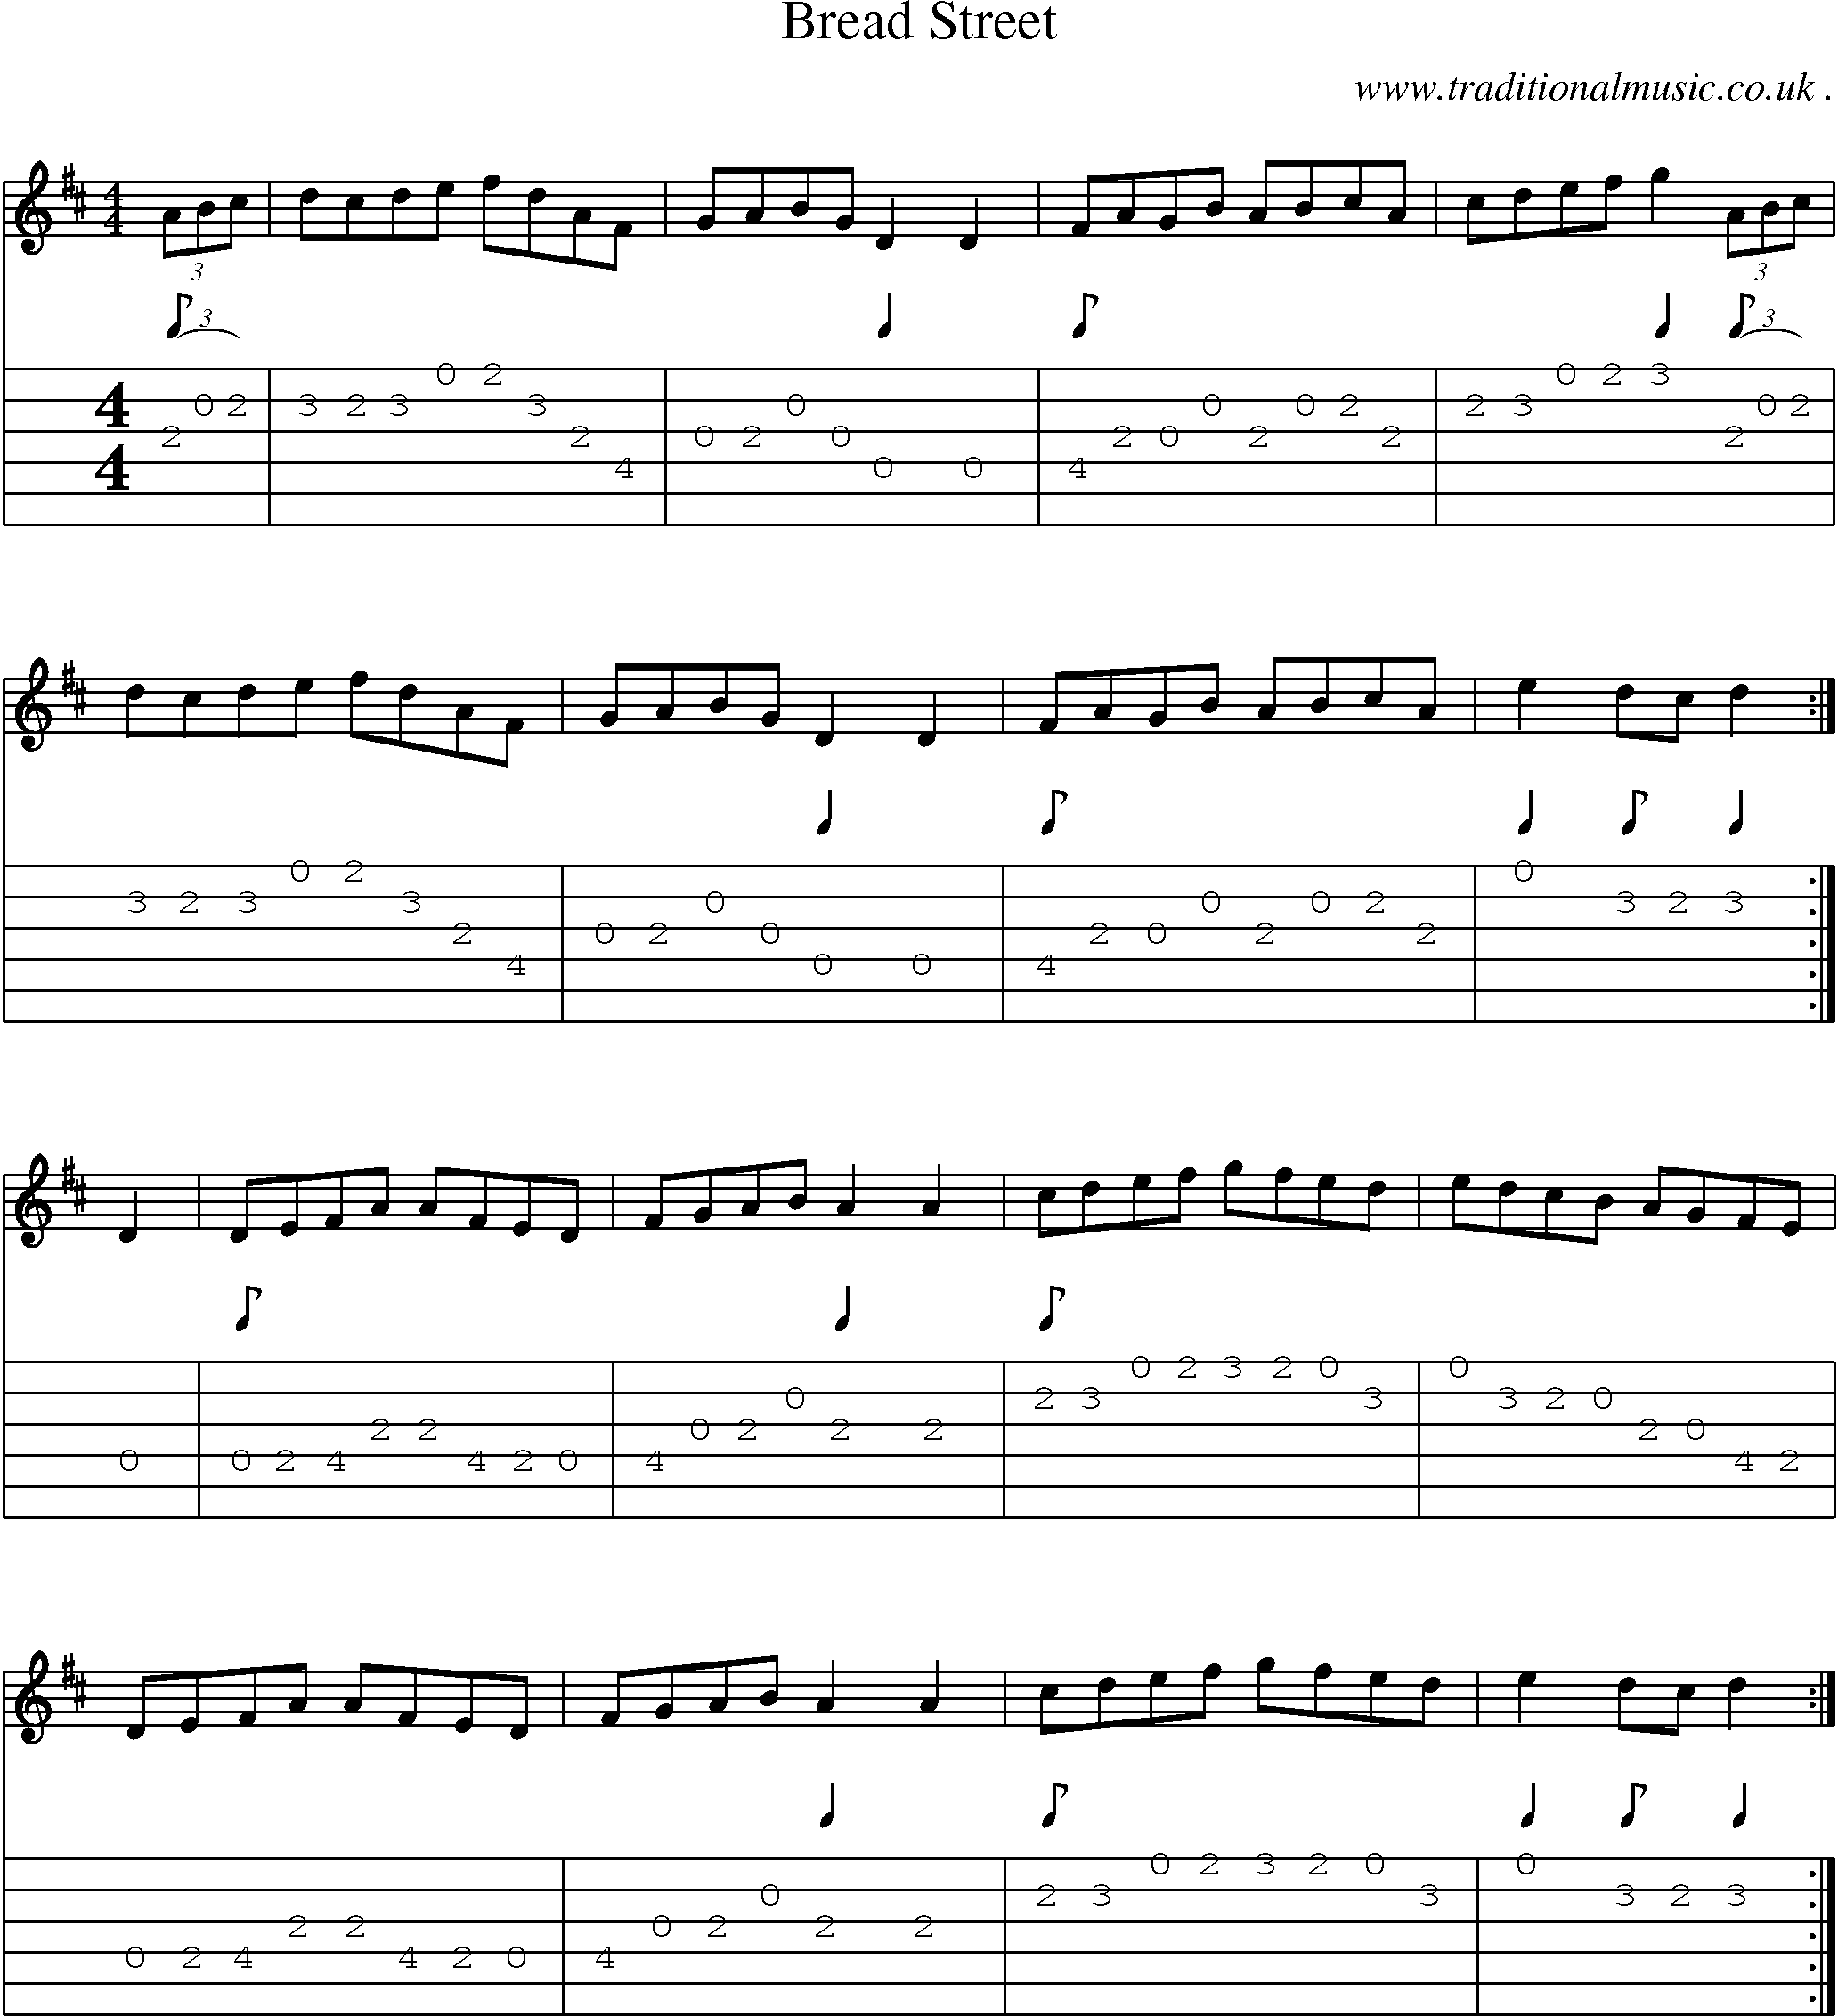 Sheet-Music and Guitar Tabs for Bread Street